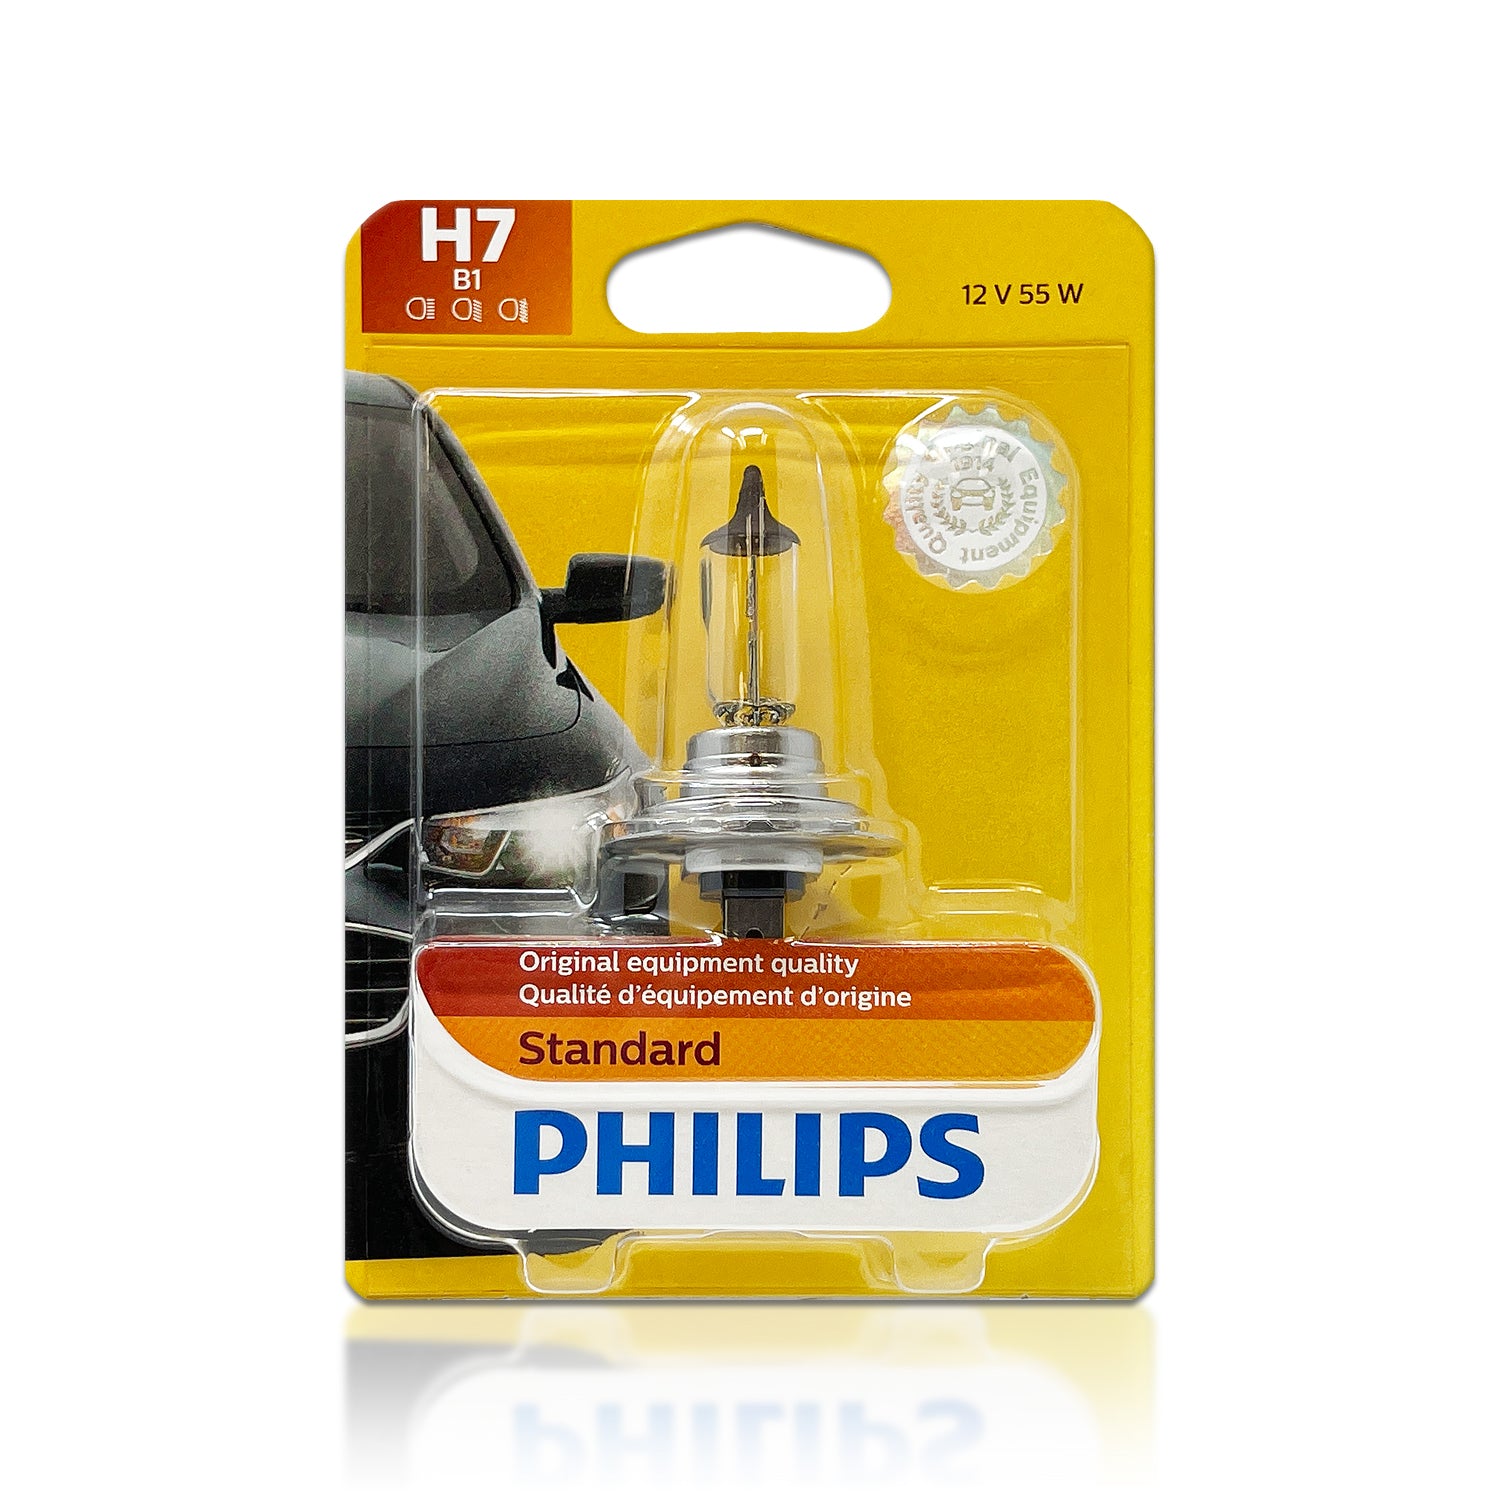 1 Ampoule Philips H7 Racing Vision Gt200 12v 55w